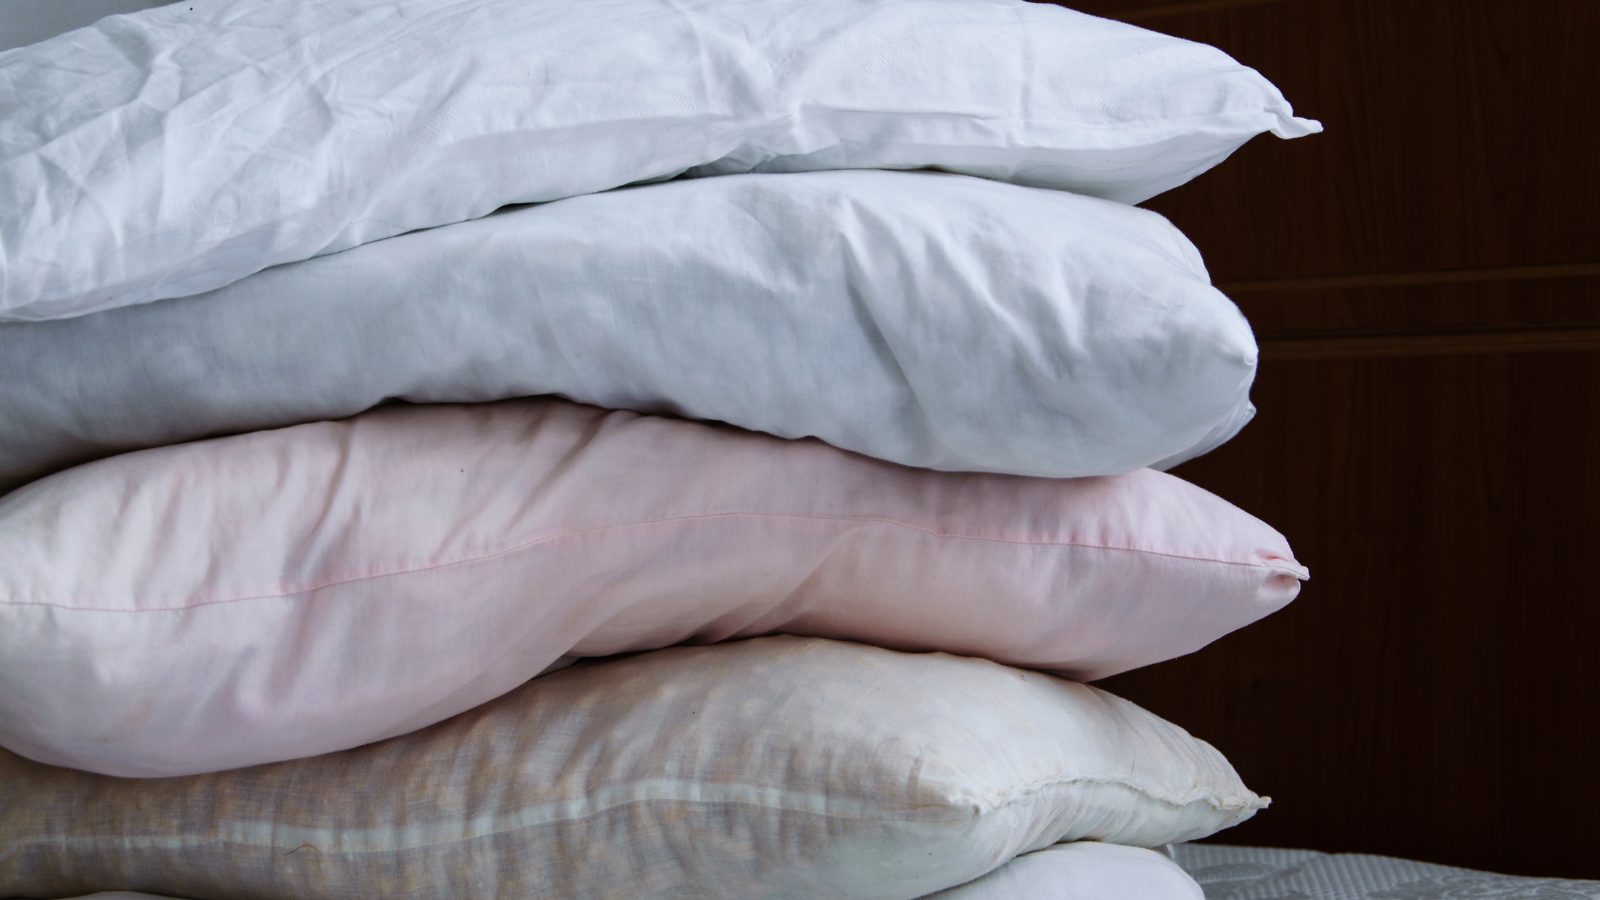 the most comfortable pillow review